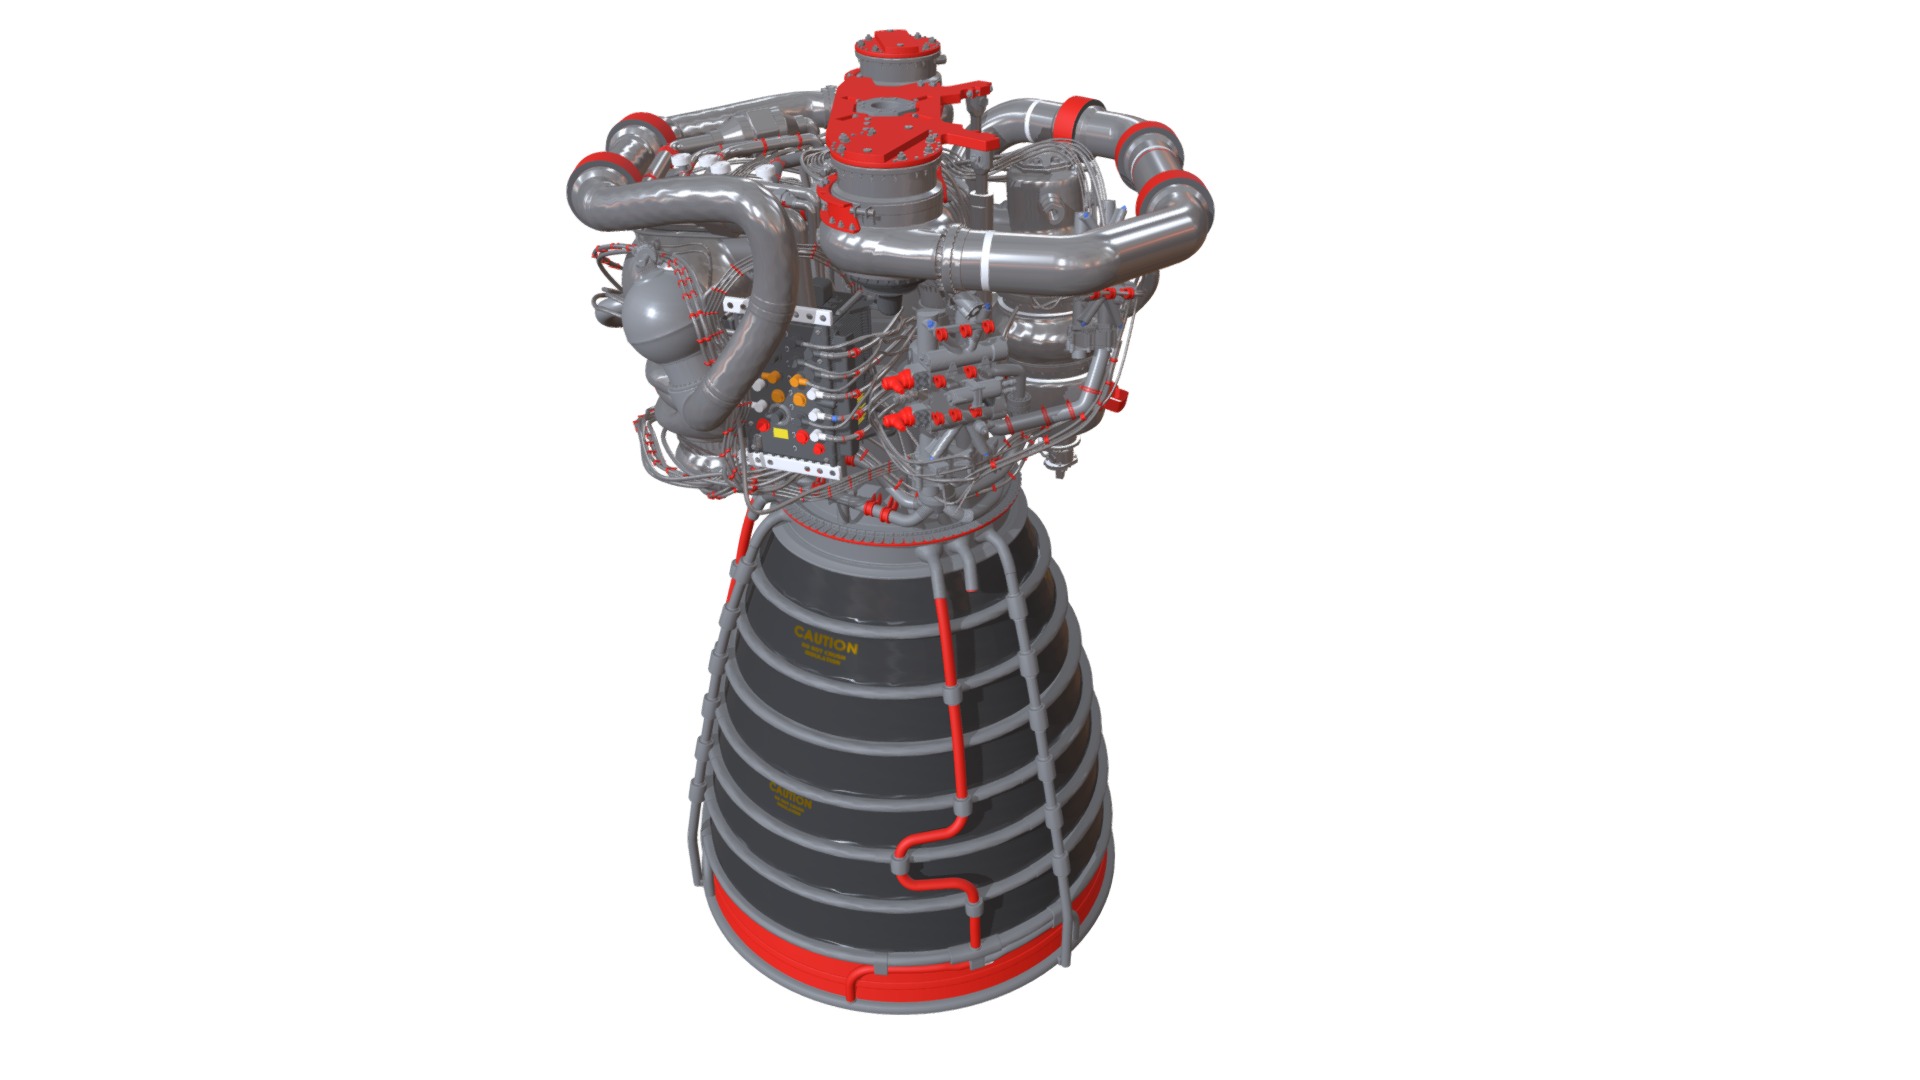 3D model RS-25 Space Shuttle Rocket Engine - This is a 3D model of the RS-25 Space Shuttle Rocket Engine. The 3D model is about a red and white robot.